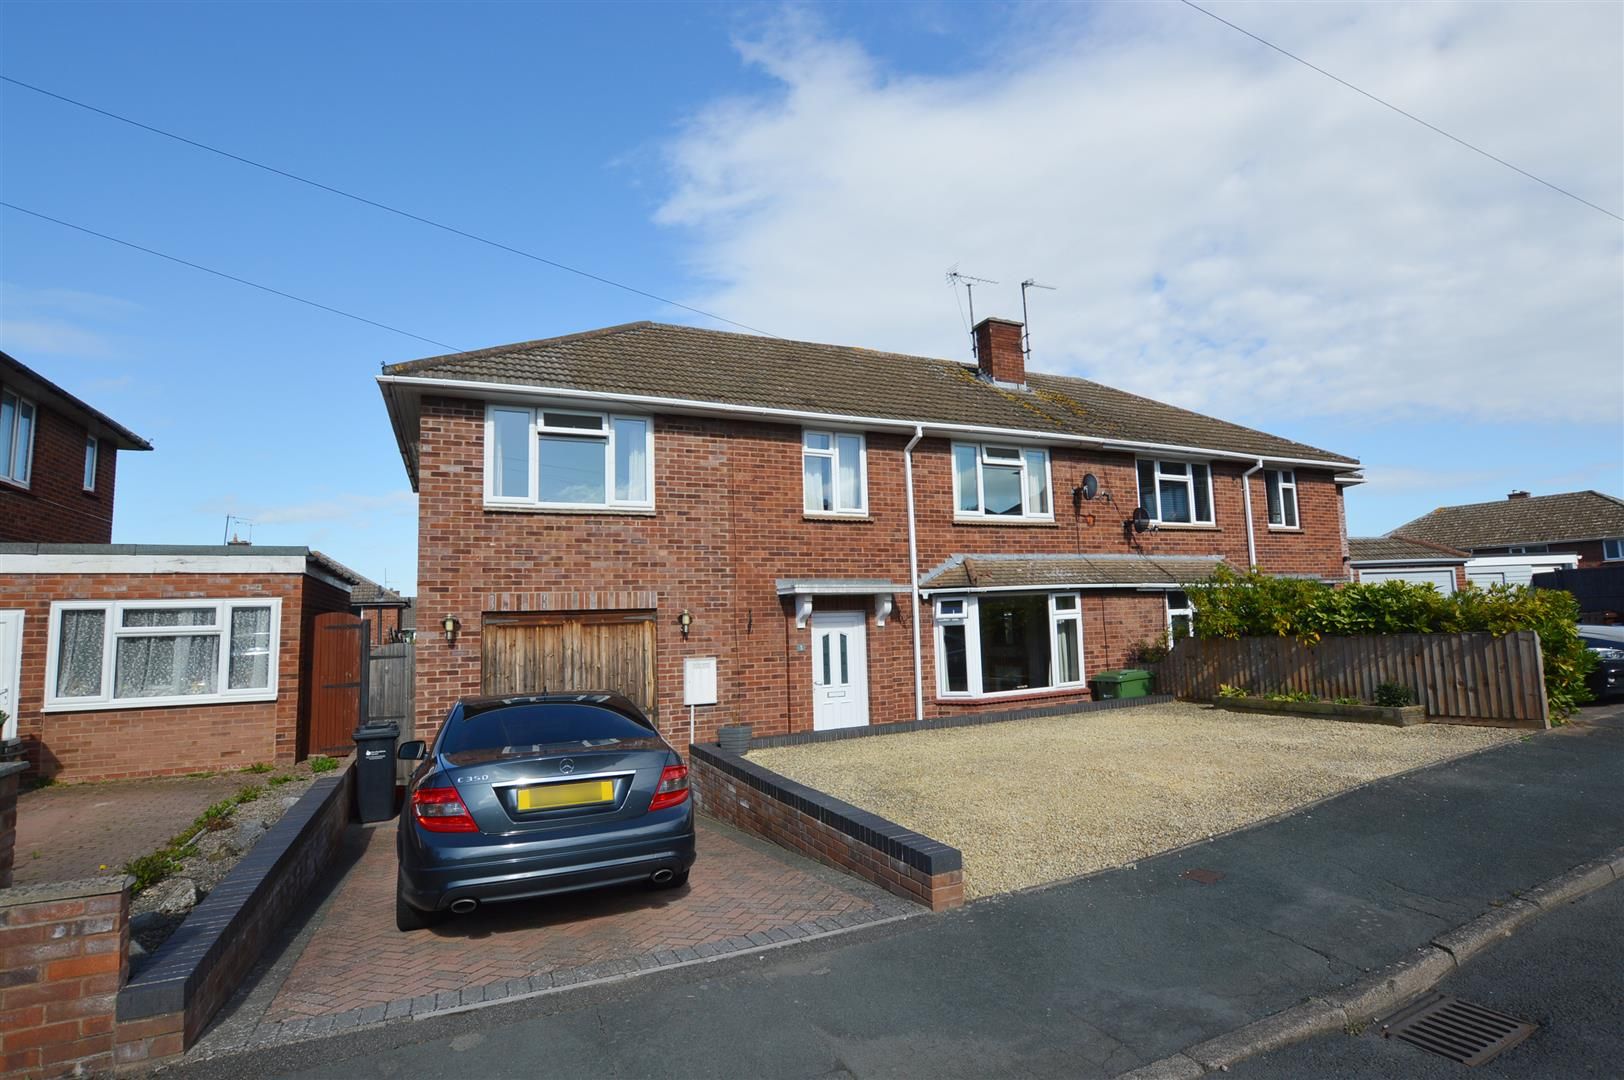 4 bed semi-detached for sale in Hereford - Property Image 1